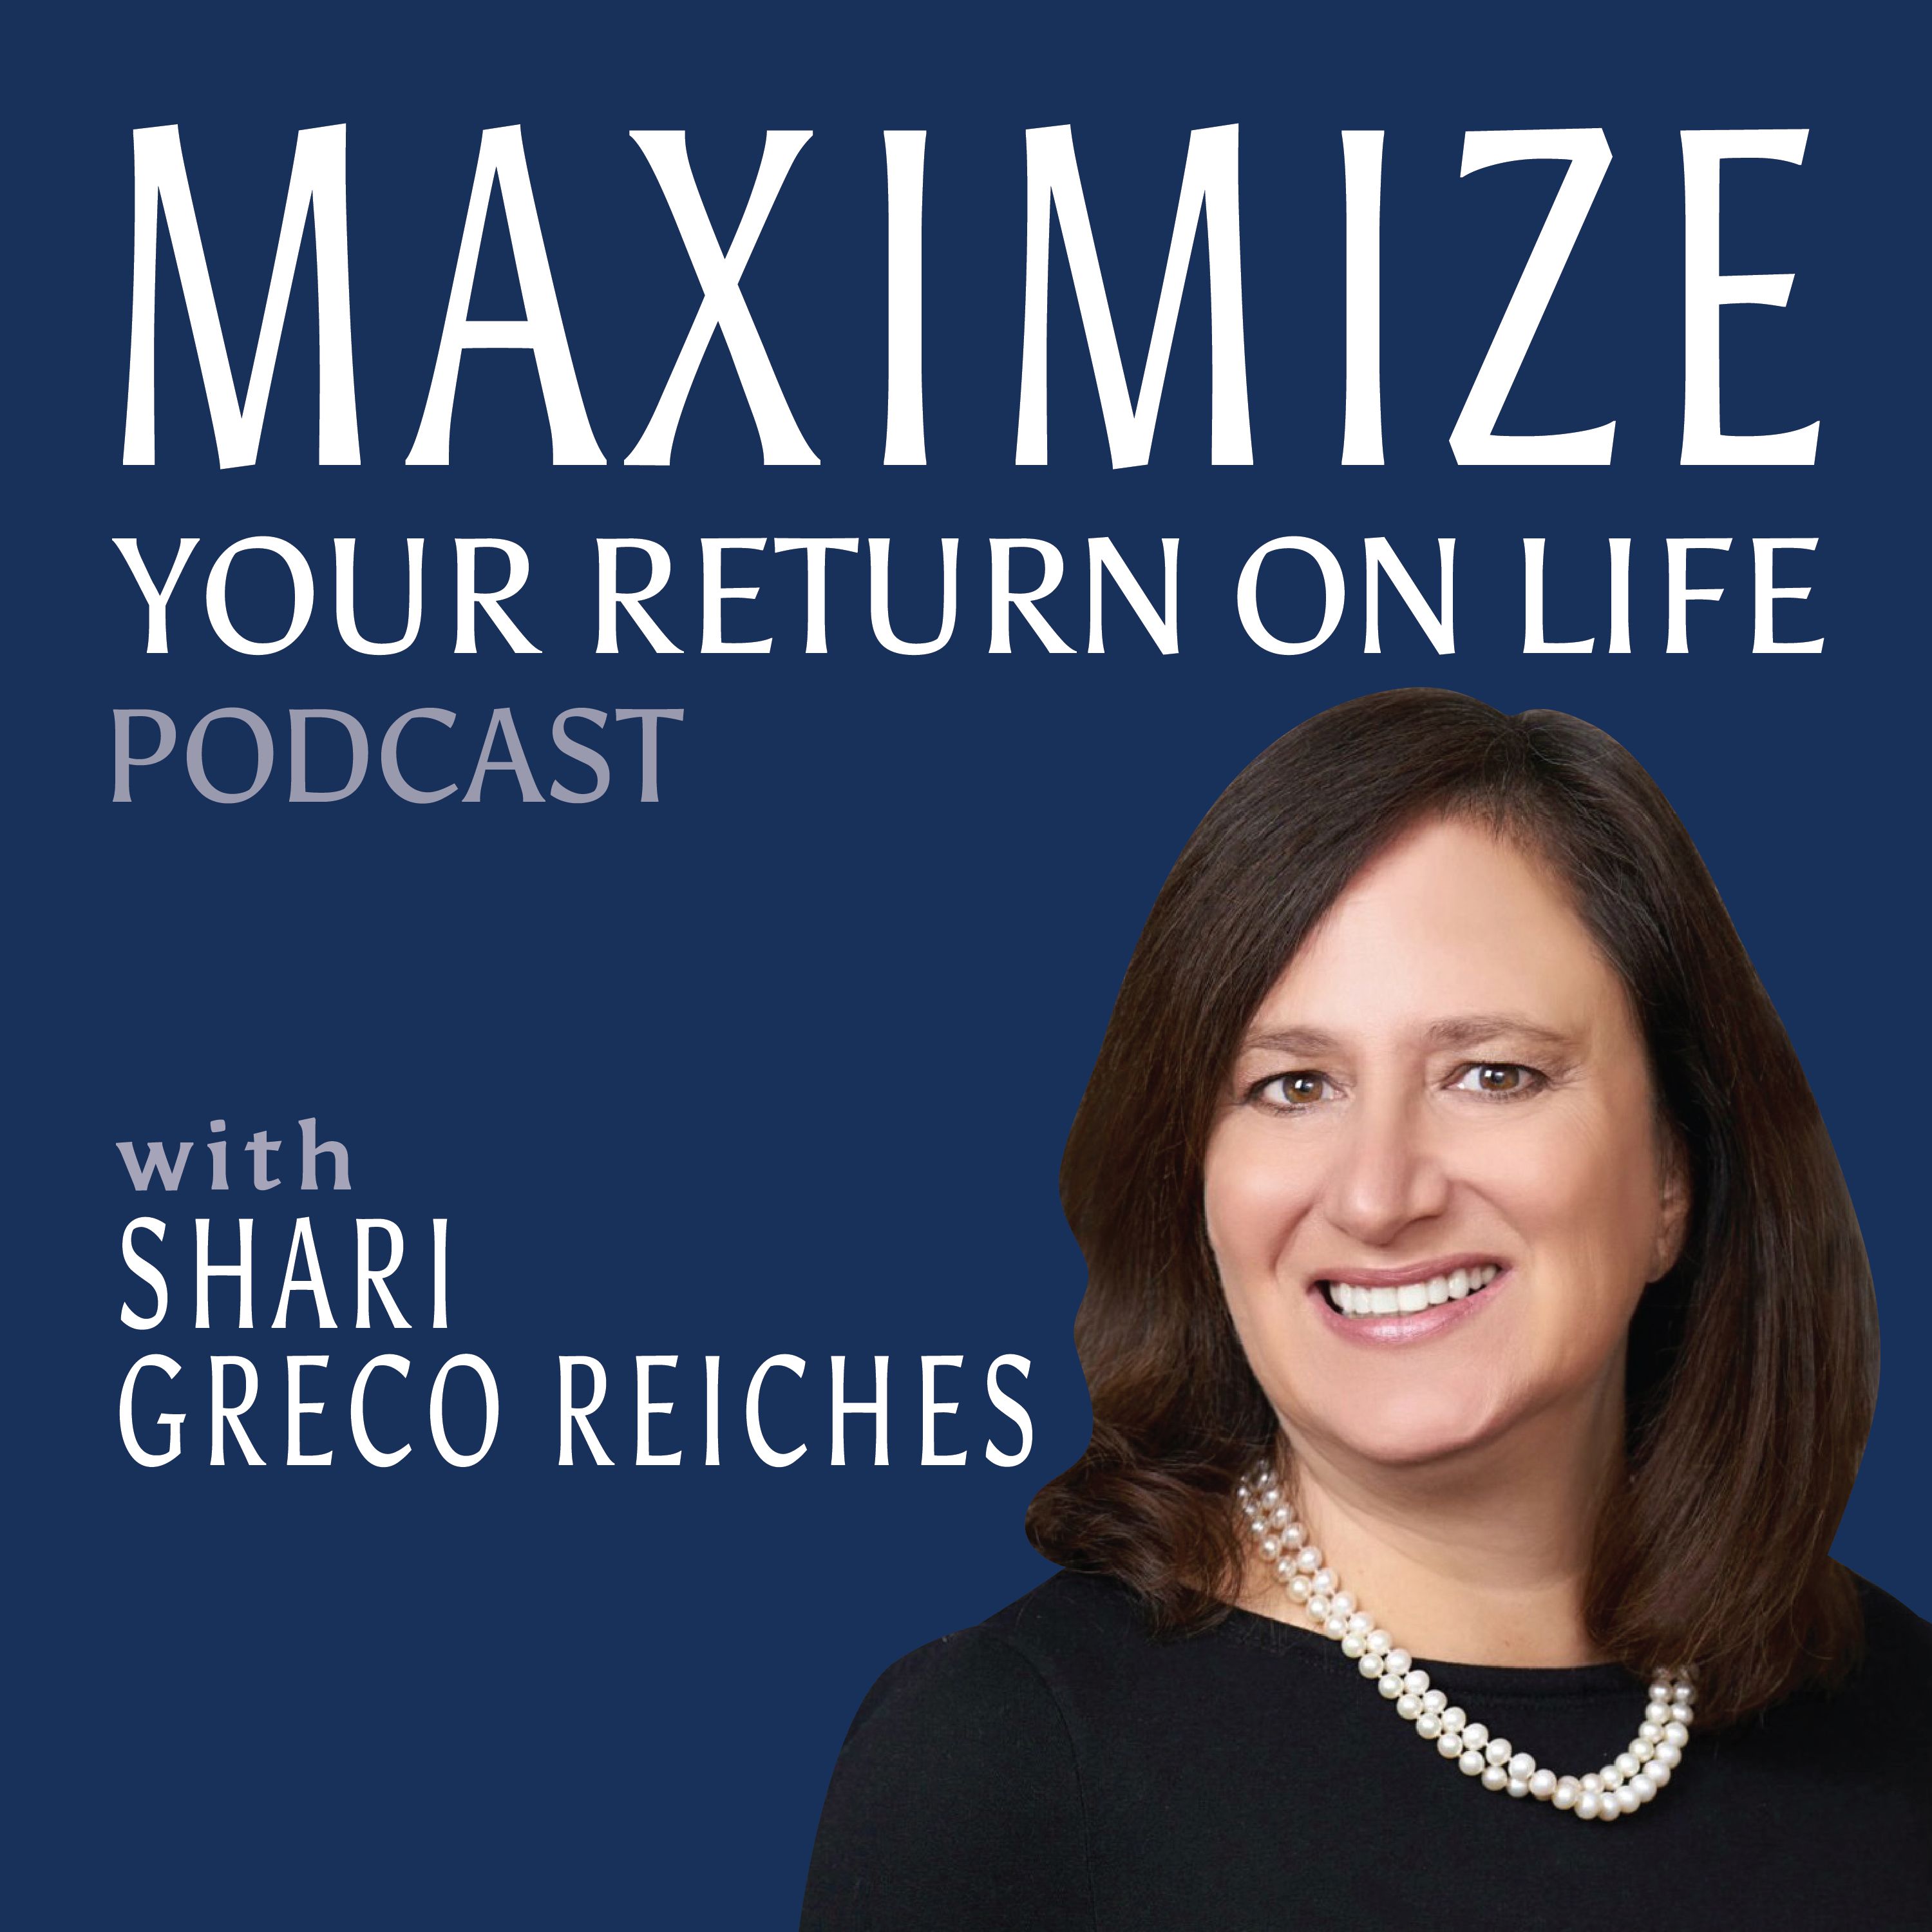 Maximize Your Return on Life Podcast